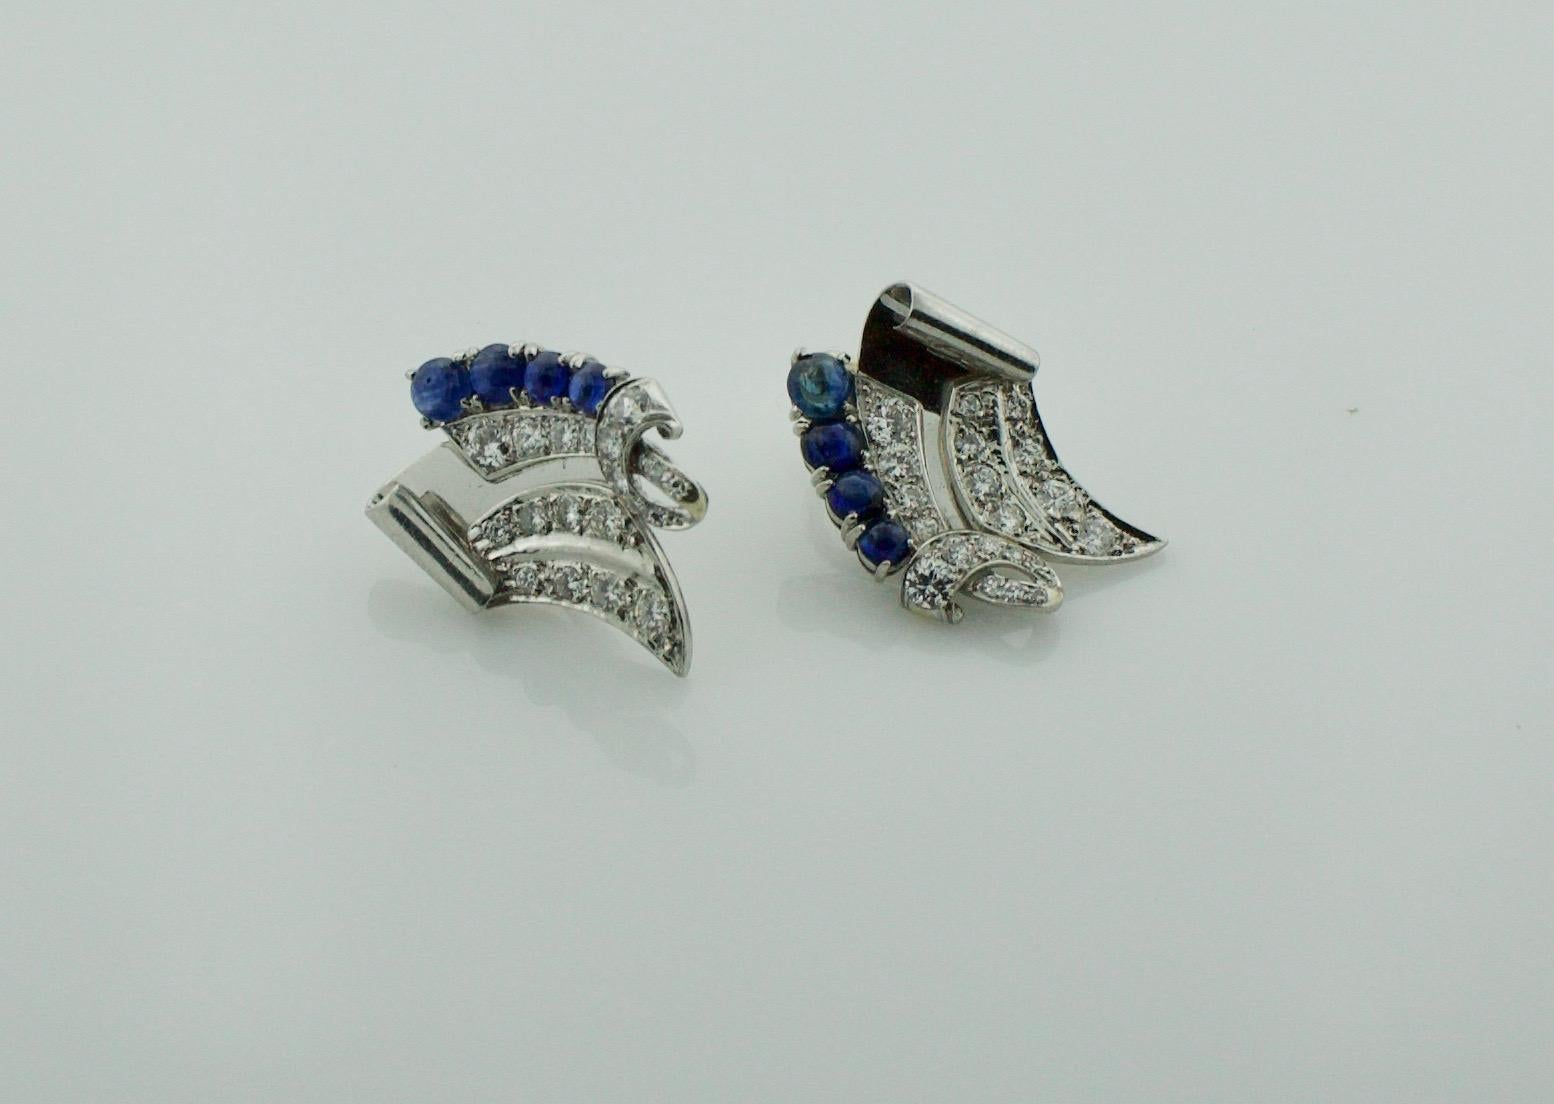 Platinum Diamond and Sapphire Handmade Earrings Circa 1950's 2.00 carats
Comfort and Style 
Eight Cabochon Cut Sapphires weighing 1.60 carats approximately [bright with no imperfections visible to the naked eye]
Forty Round Brilliant and Single Cut